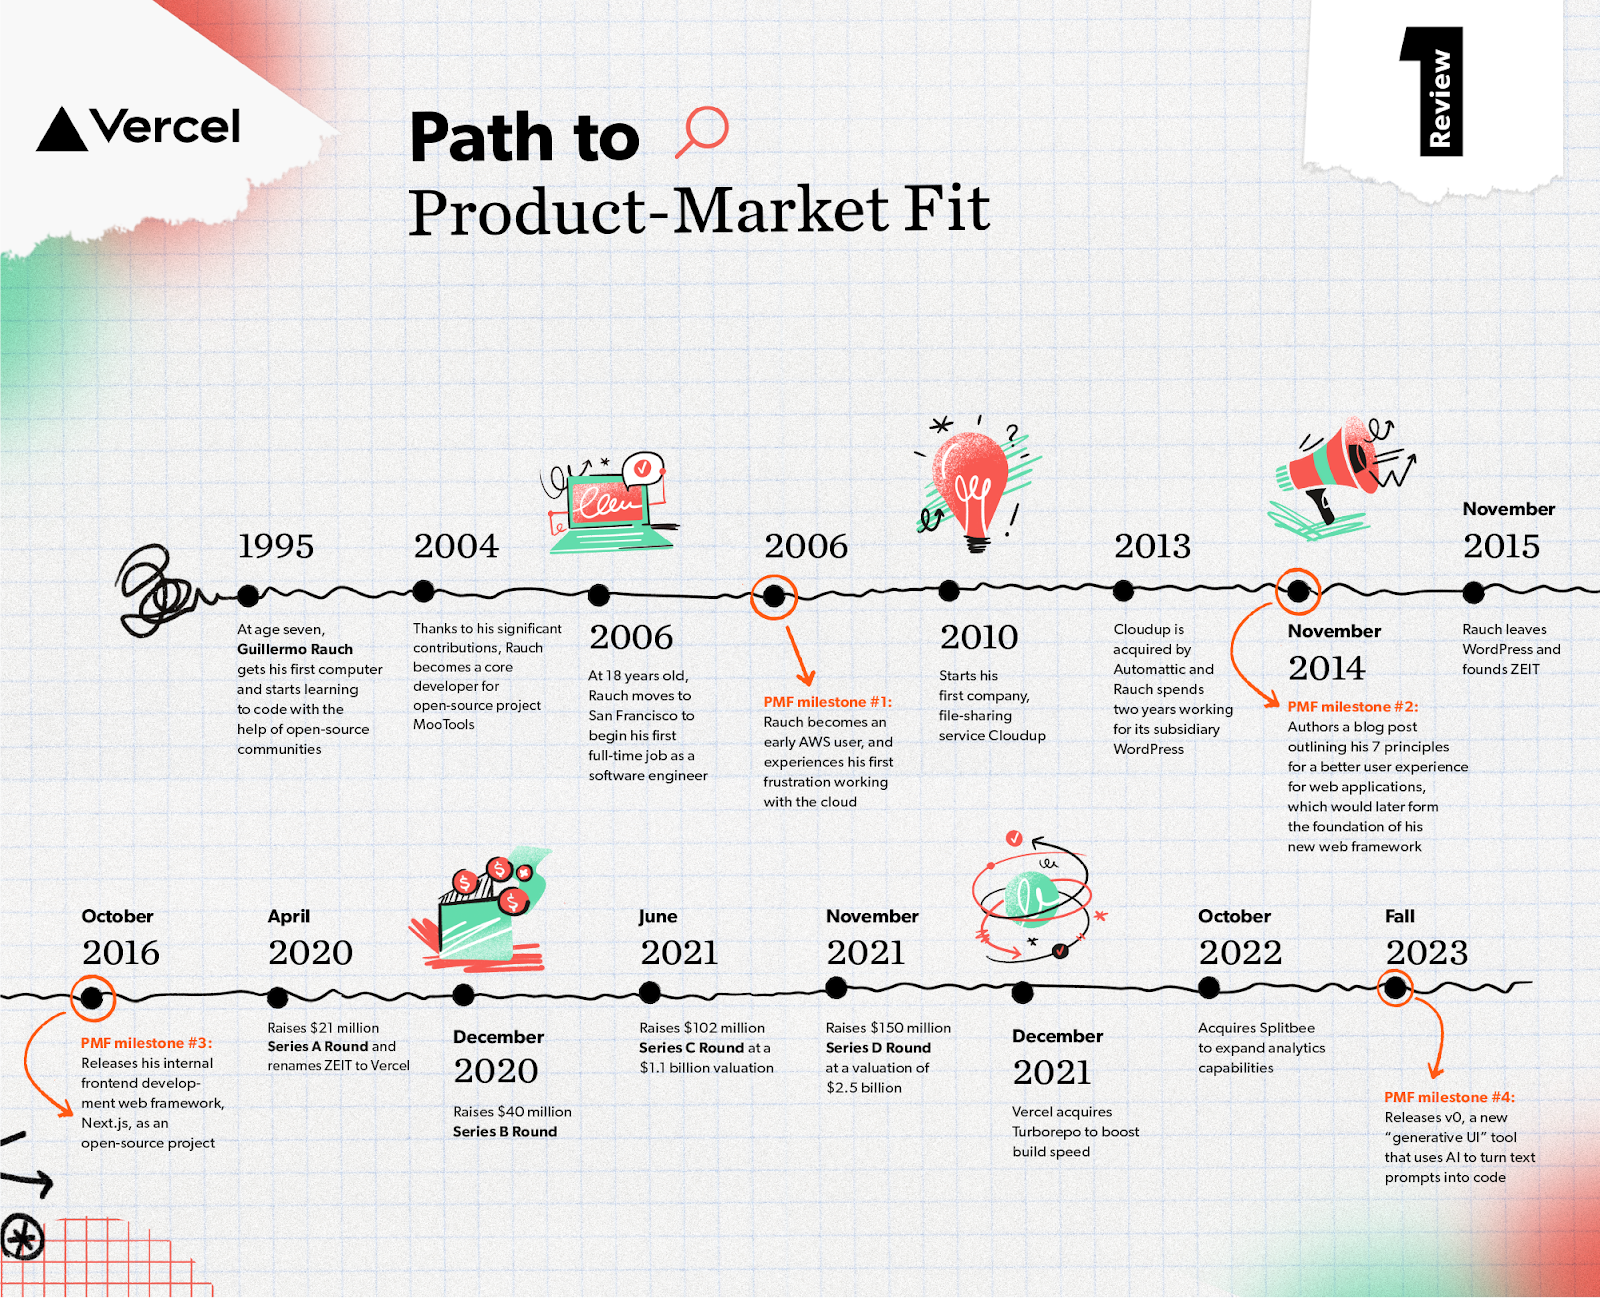 20 Lessons From 20 Different Paths to Product-Market Fit — Advice for Founders, From Founders